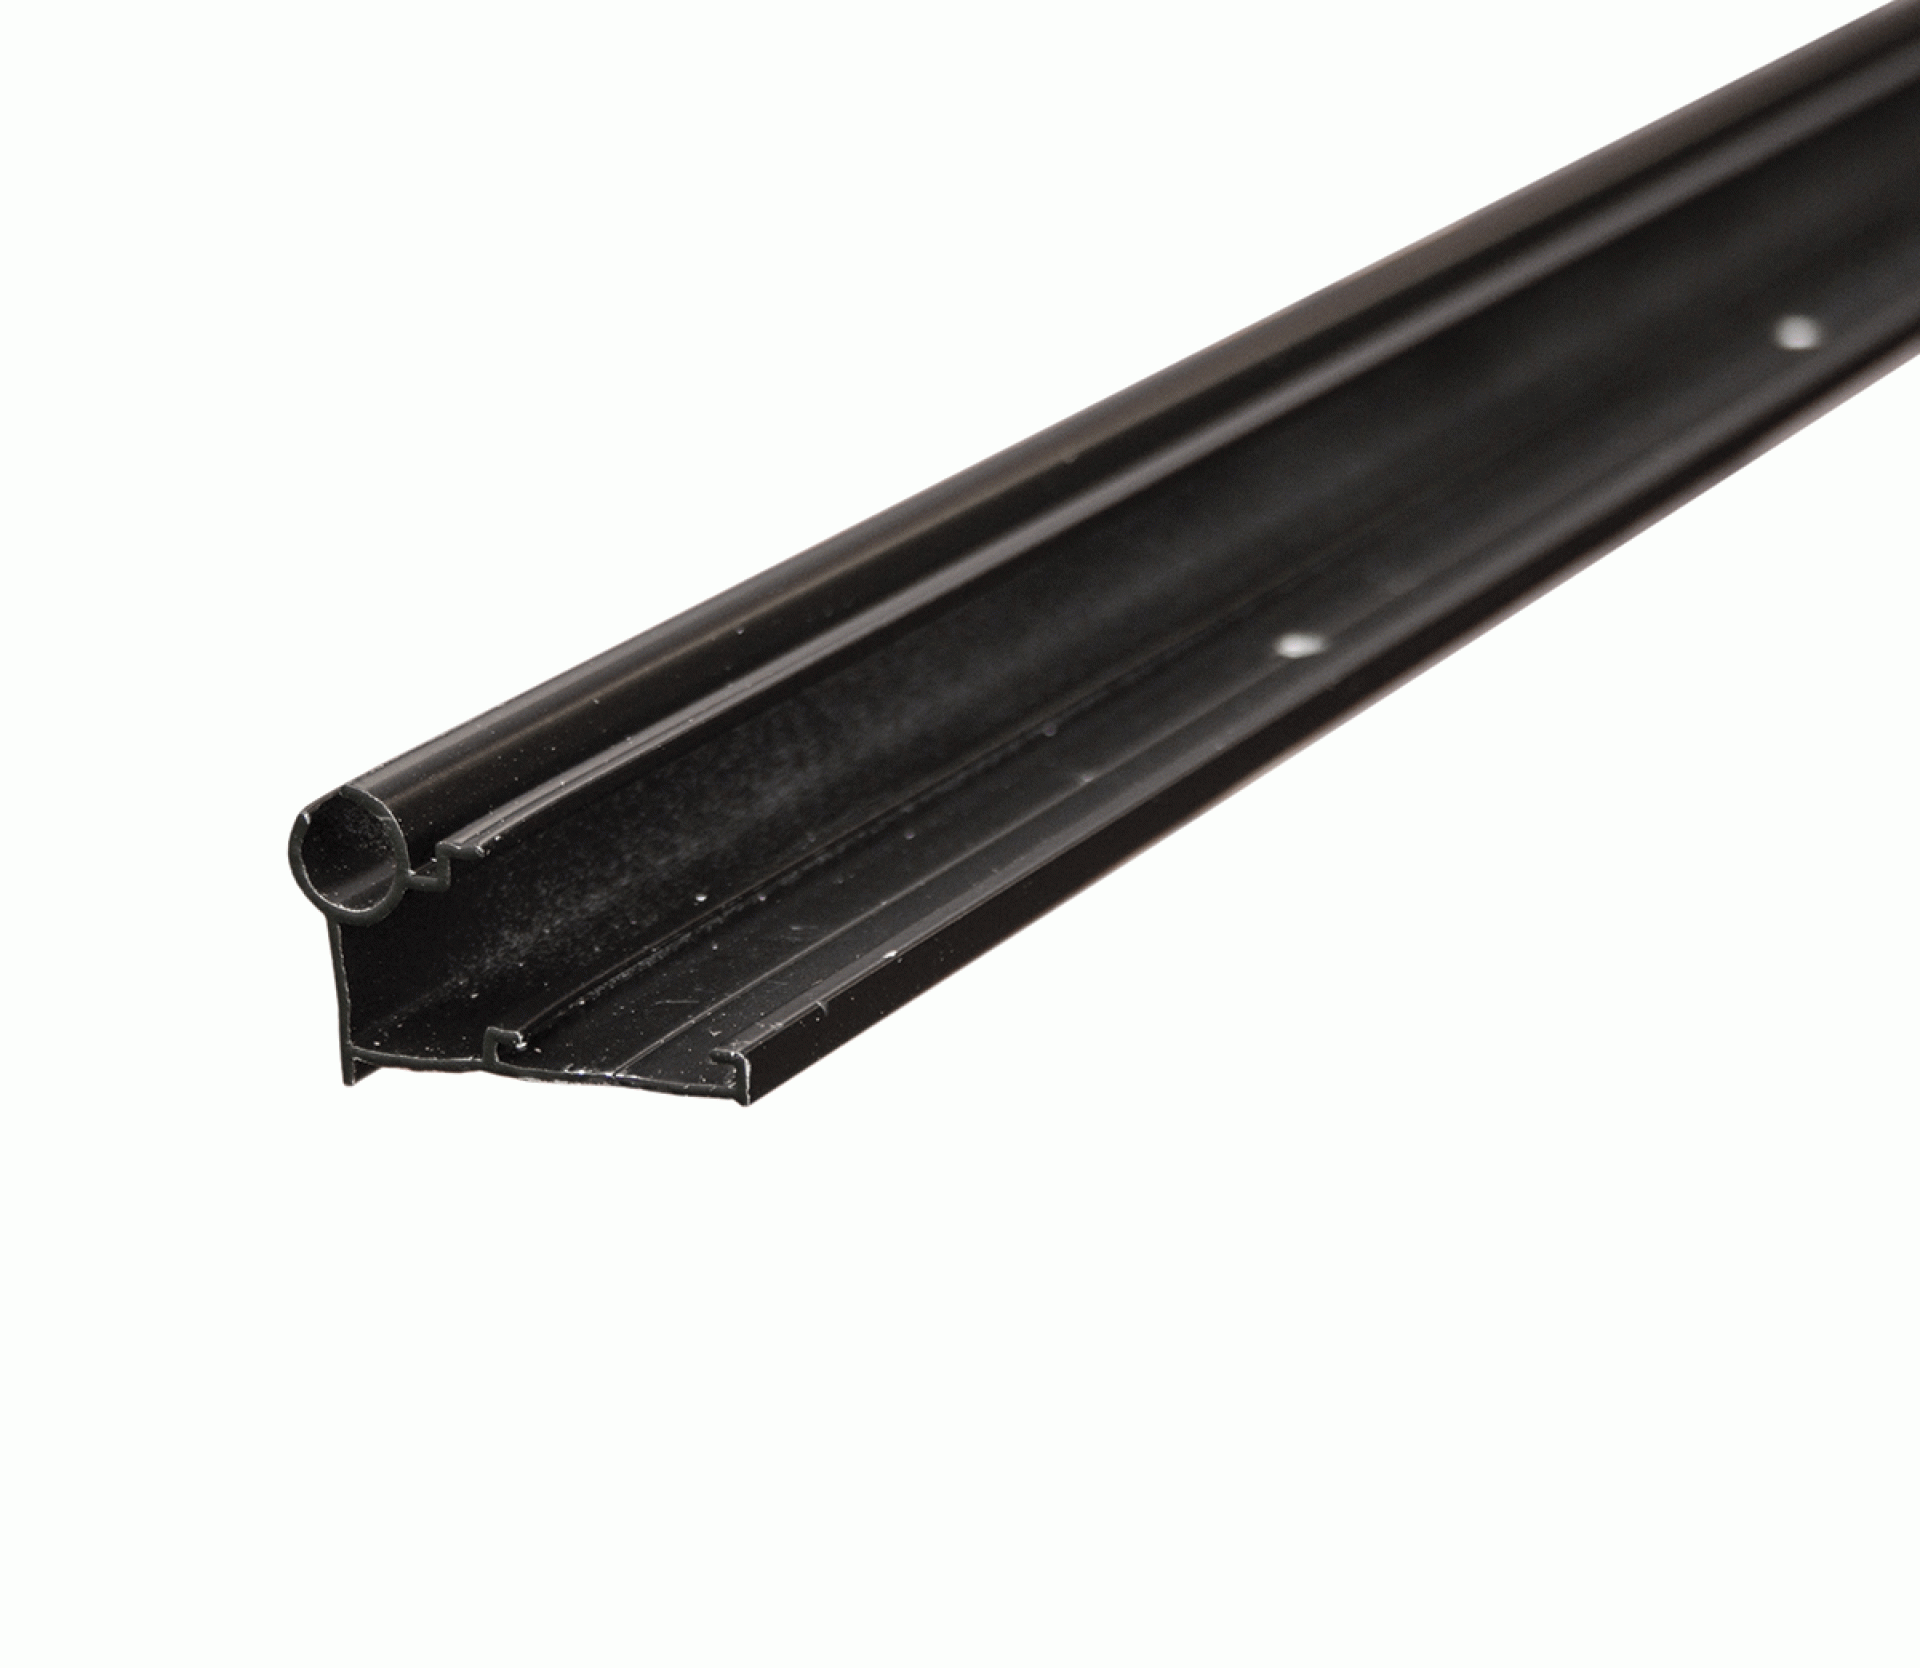 AP PRODUCTS | 021-56302-16 | Insert Gutter/Awning Rail - 16' - Black